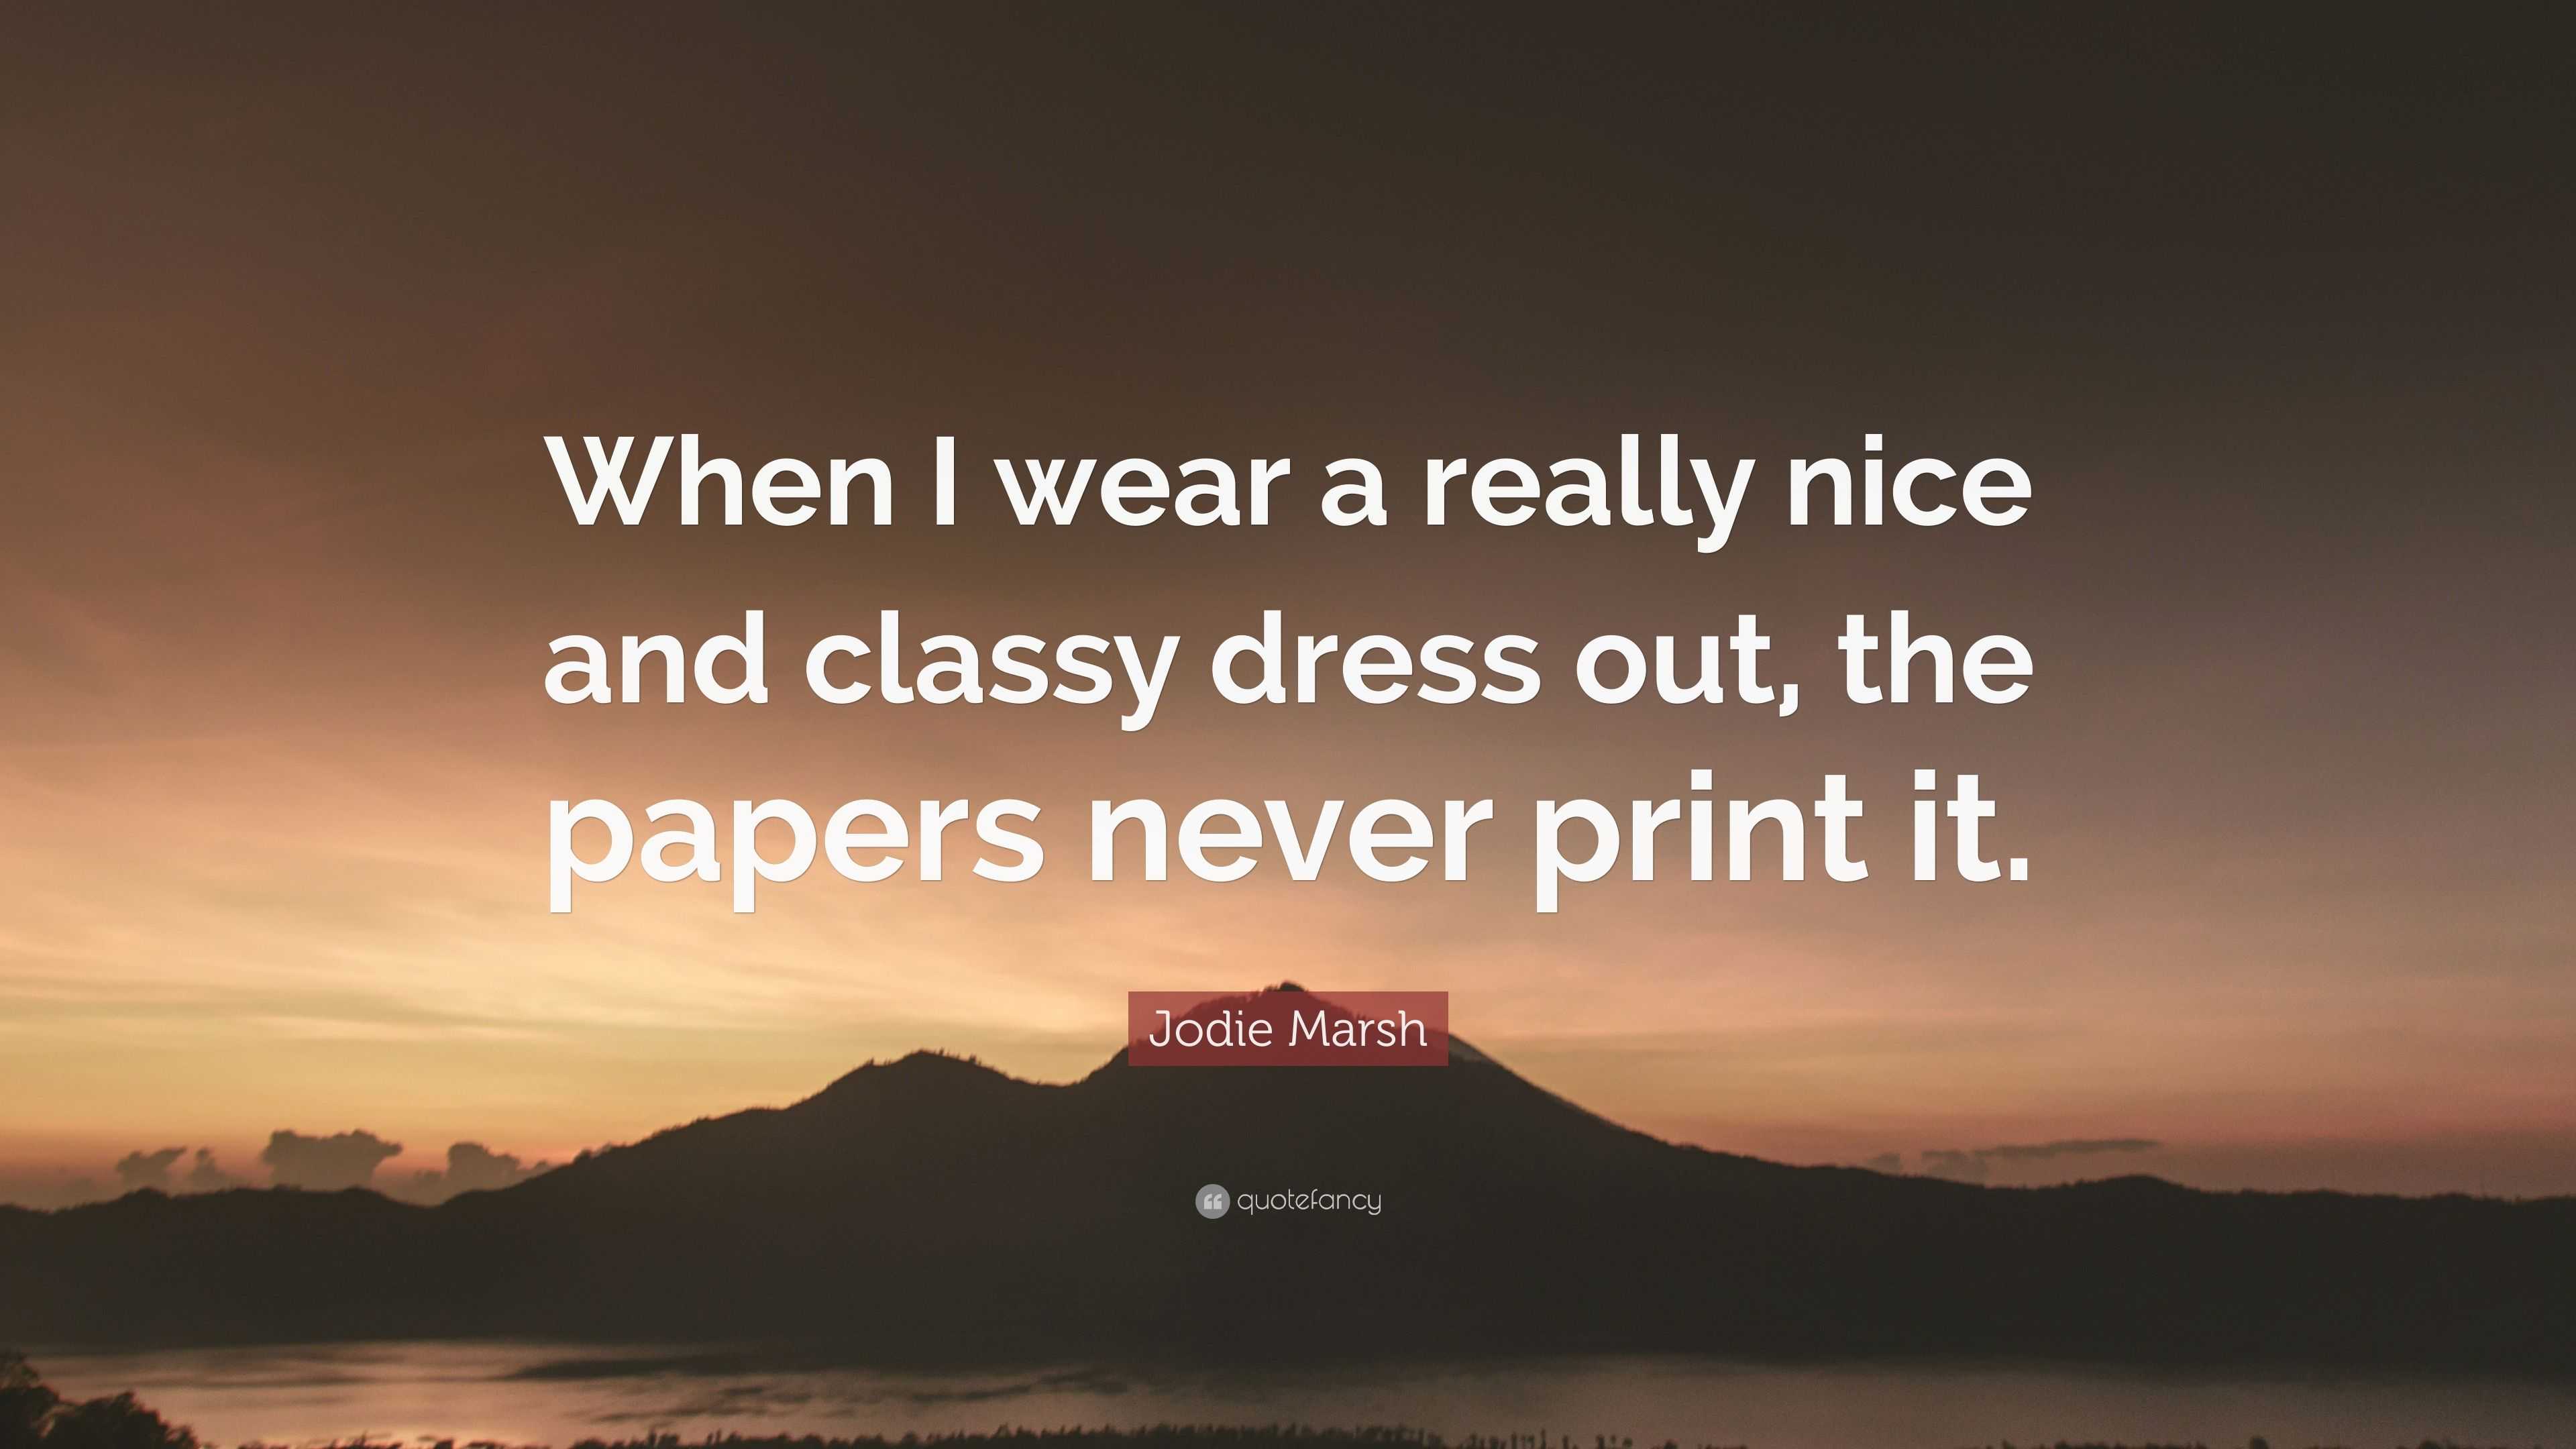 The Classy Woman ®: 10 Benefits of Being Well Dressed | Fashion quotes coco  chanel, Fashion quotes, Coco chanel